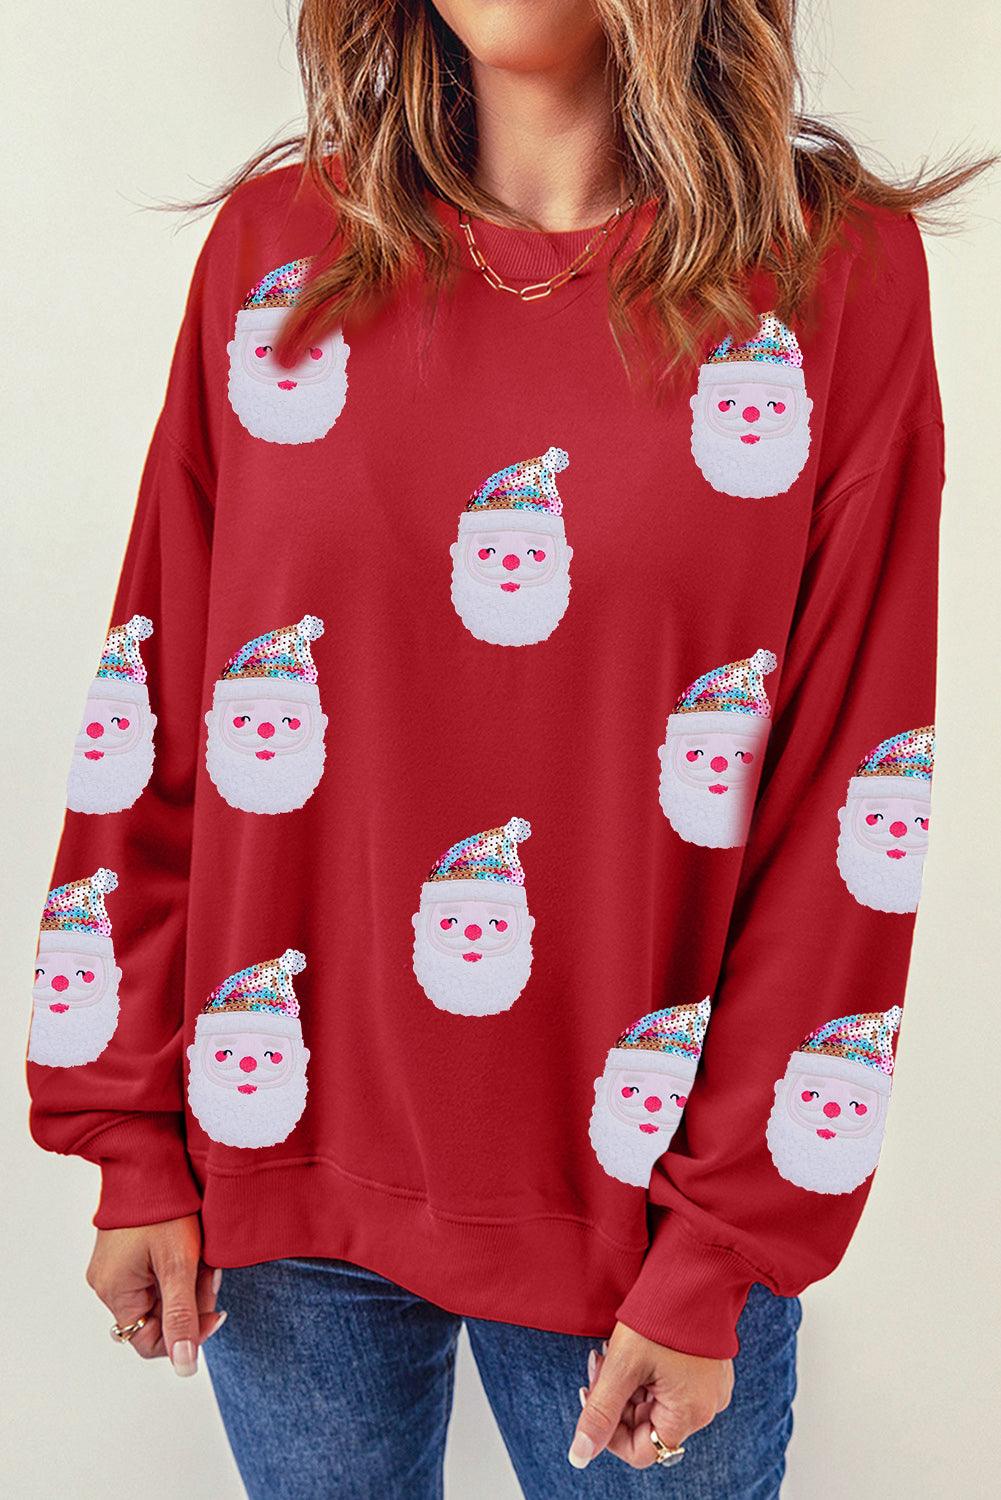 Red Sequined Christmas Santa Clause Graphic Sweatshirt - L & M Kee, LLC